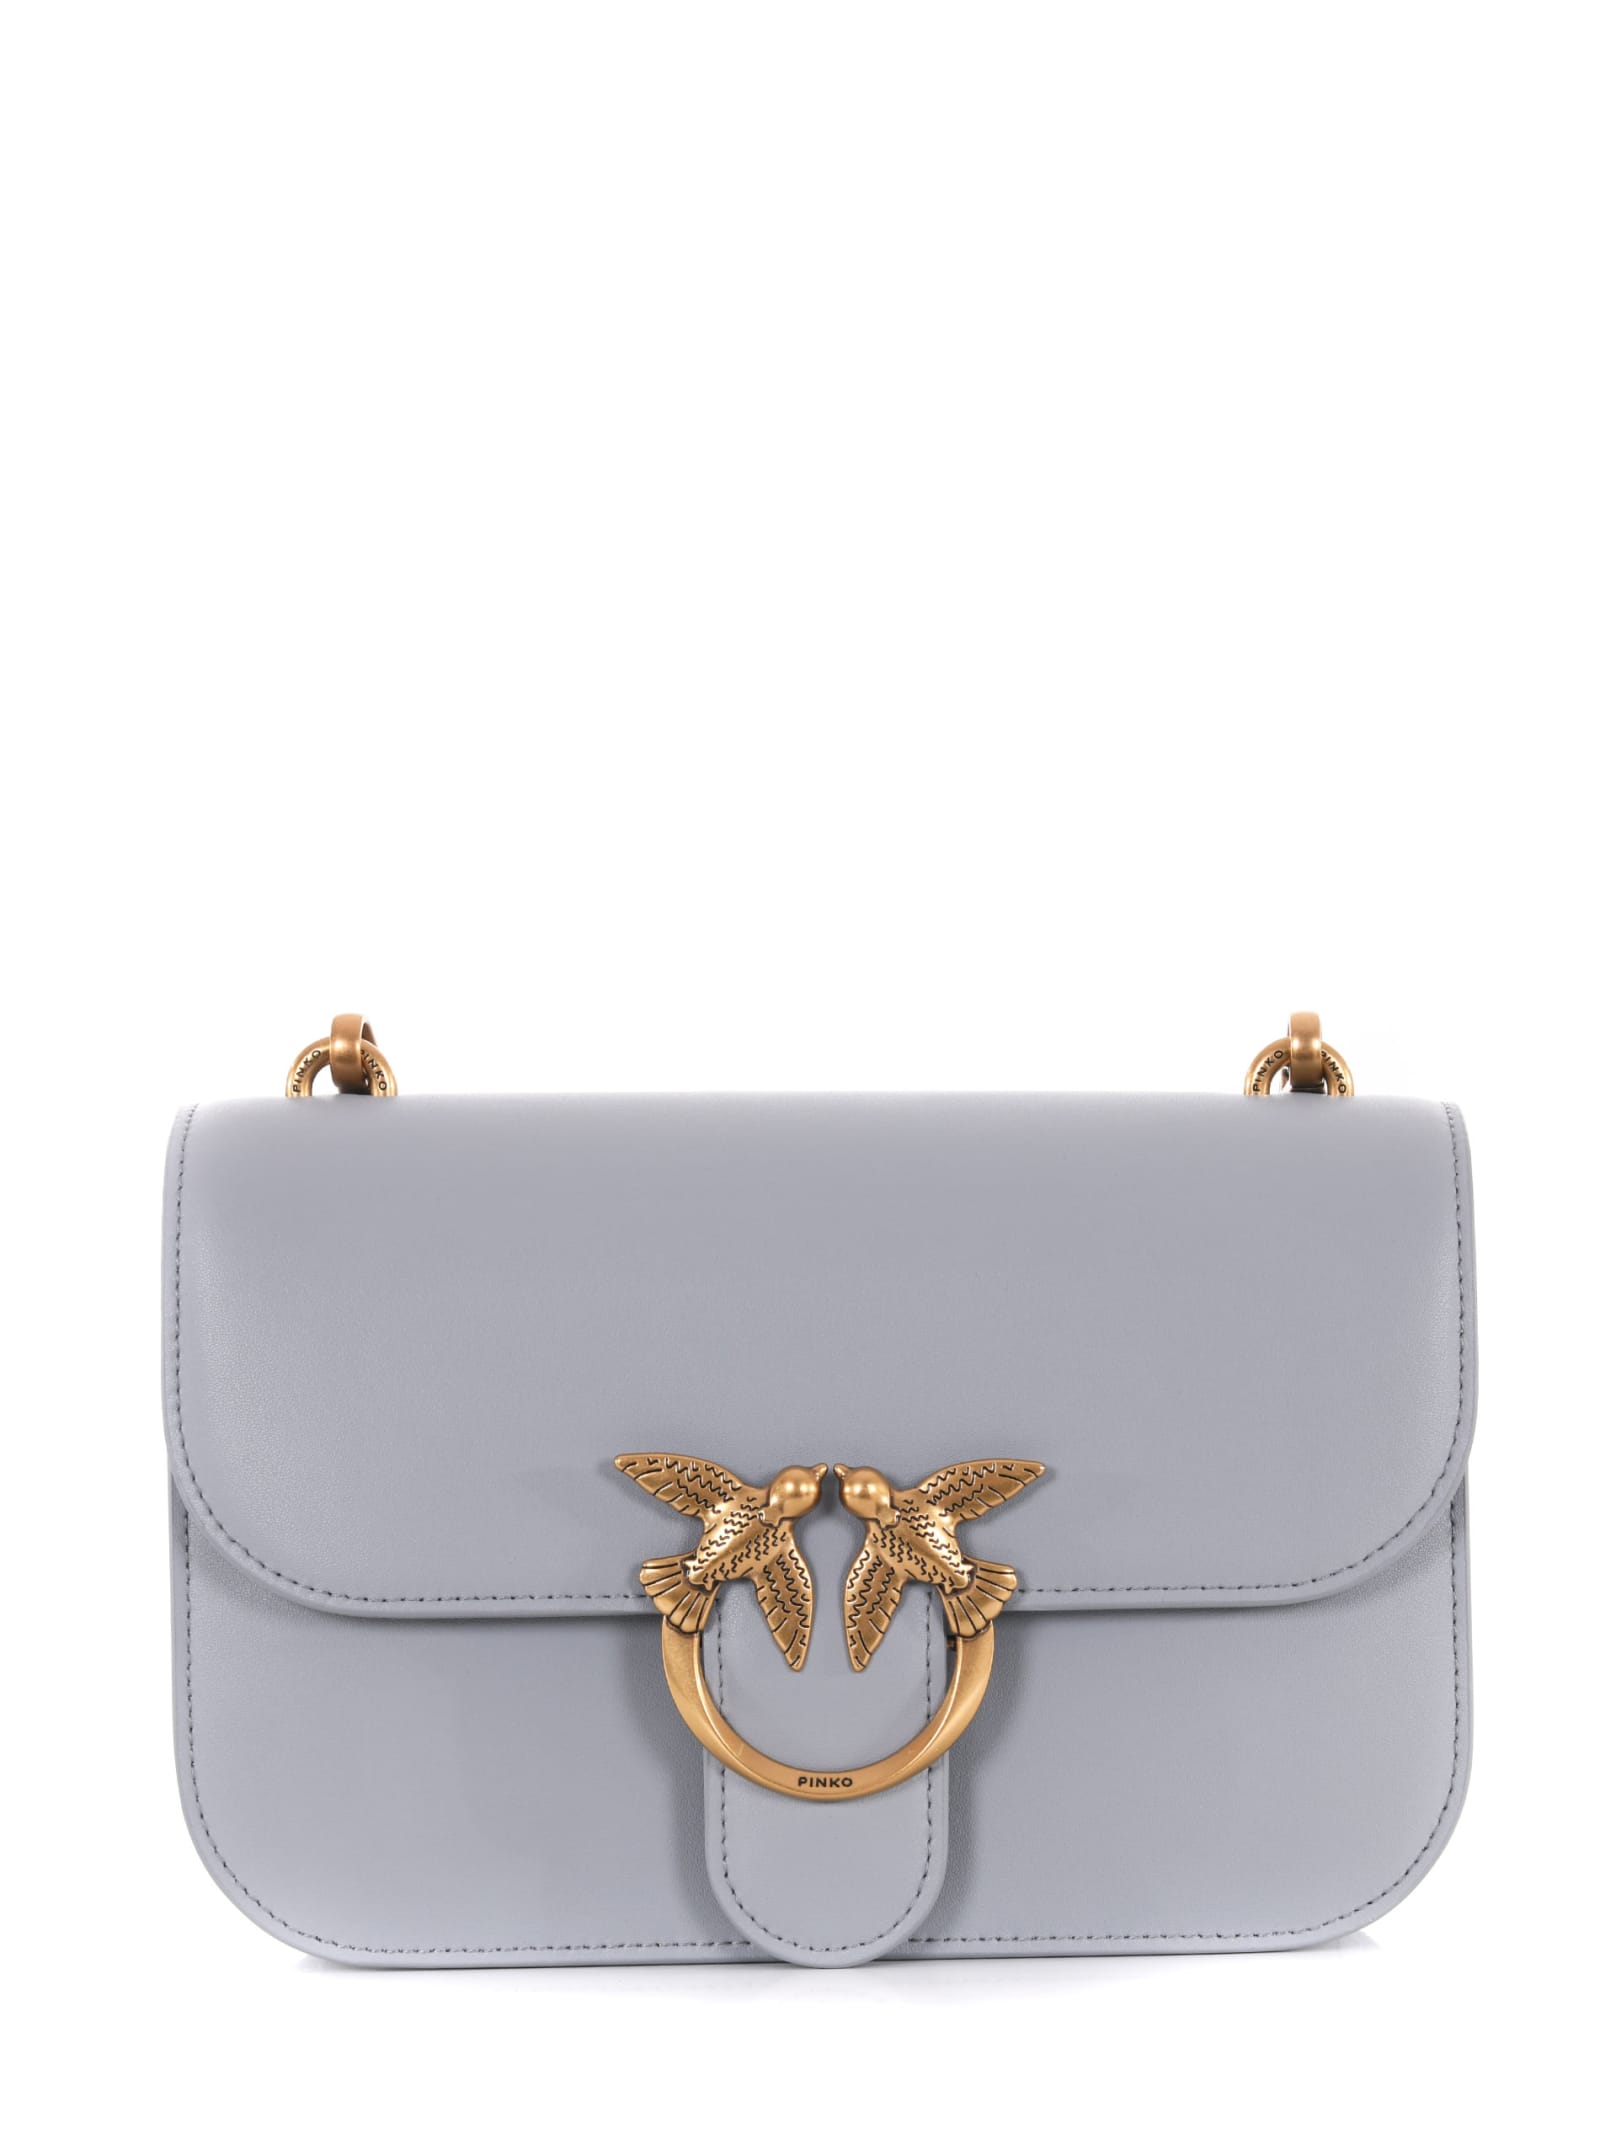 Pinko love Bell Classic Simply Leather Bag